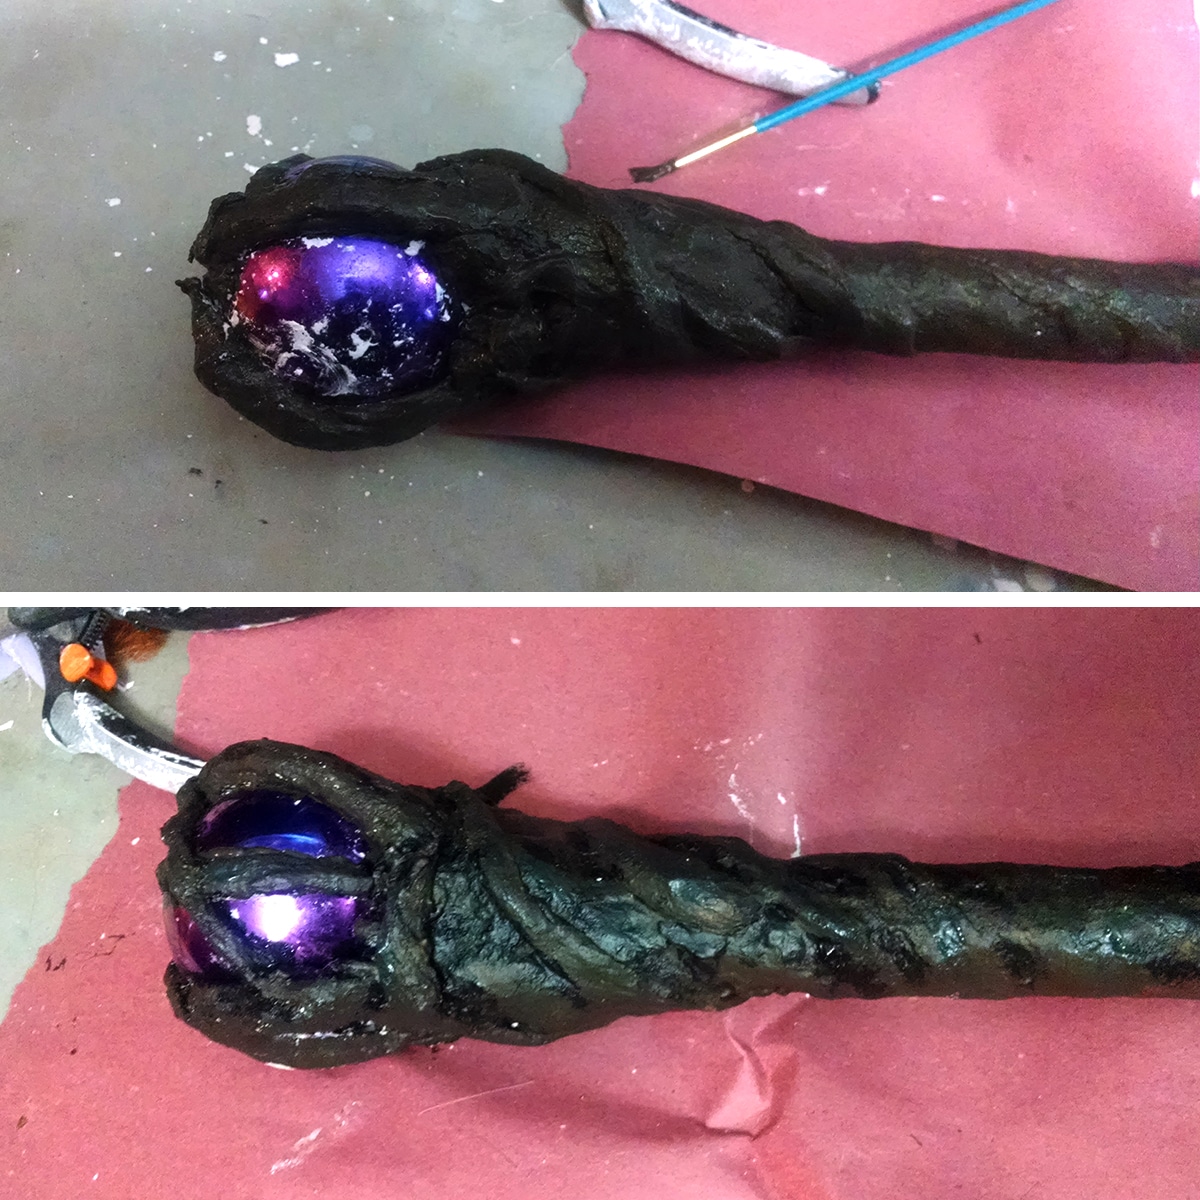 The Maleficent staff has been painted dark browns to look like wood.